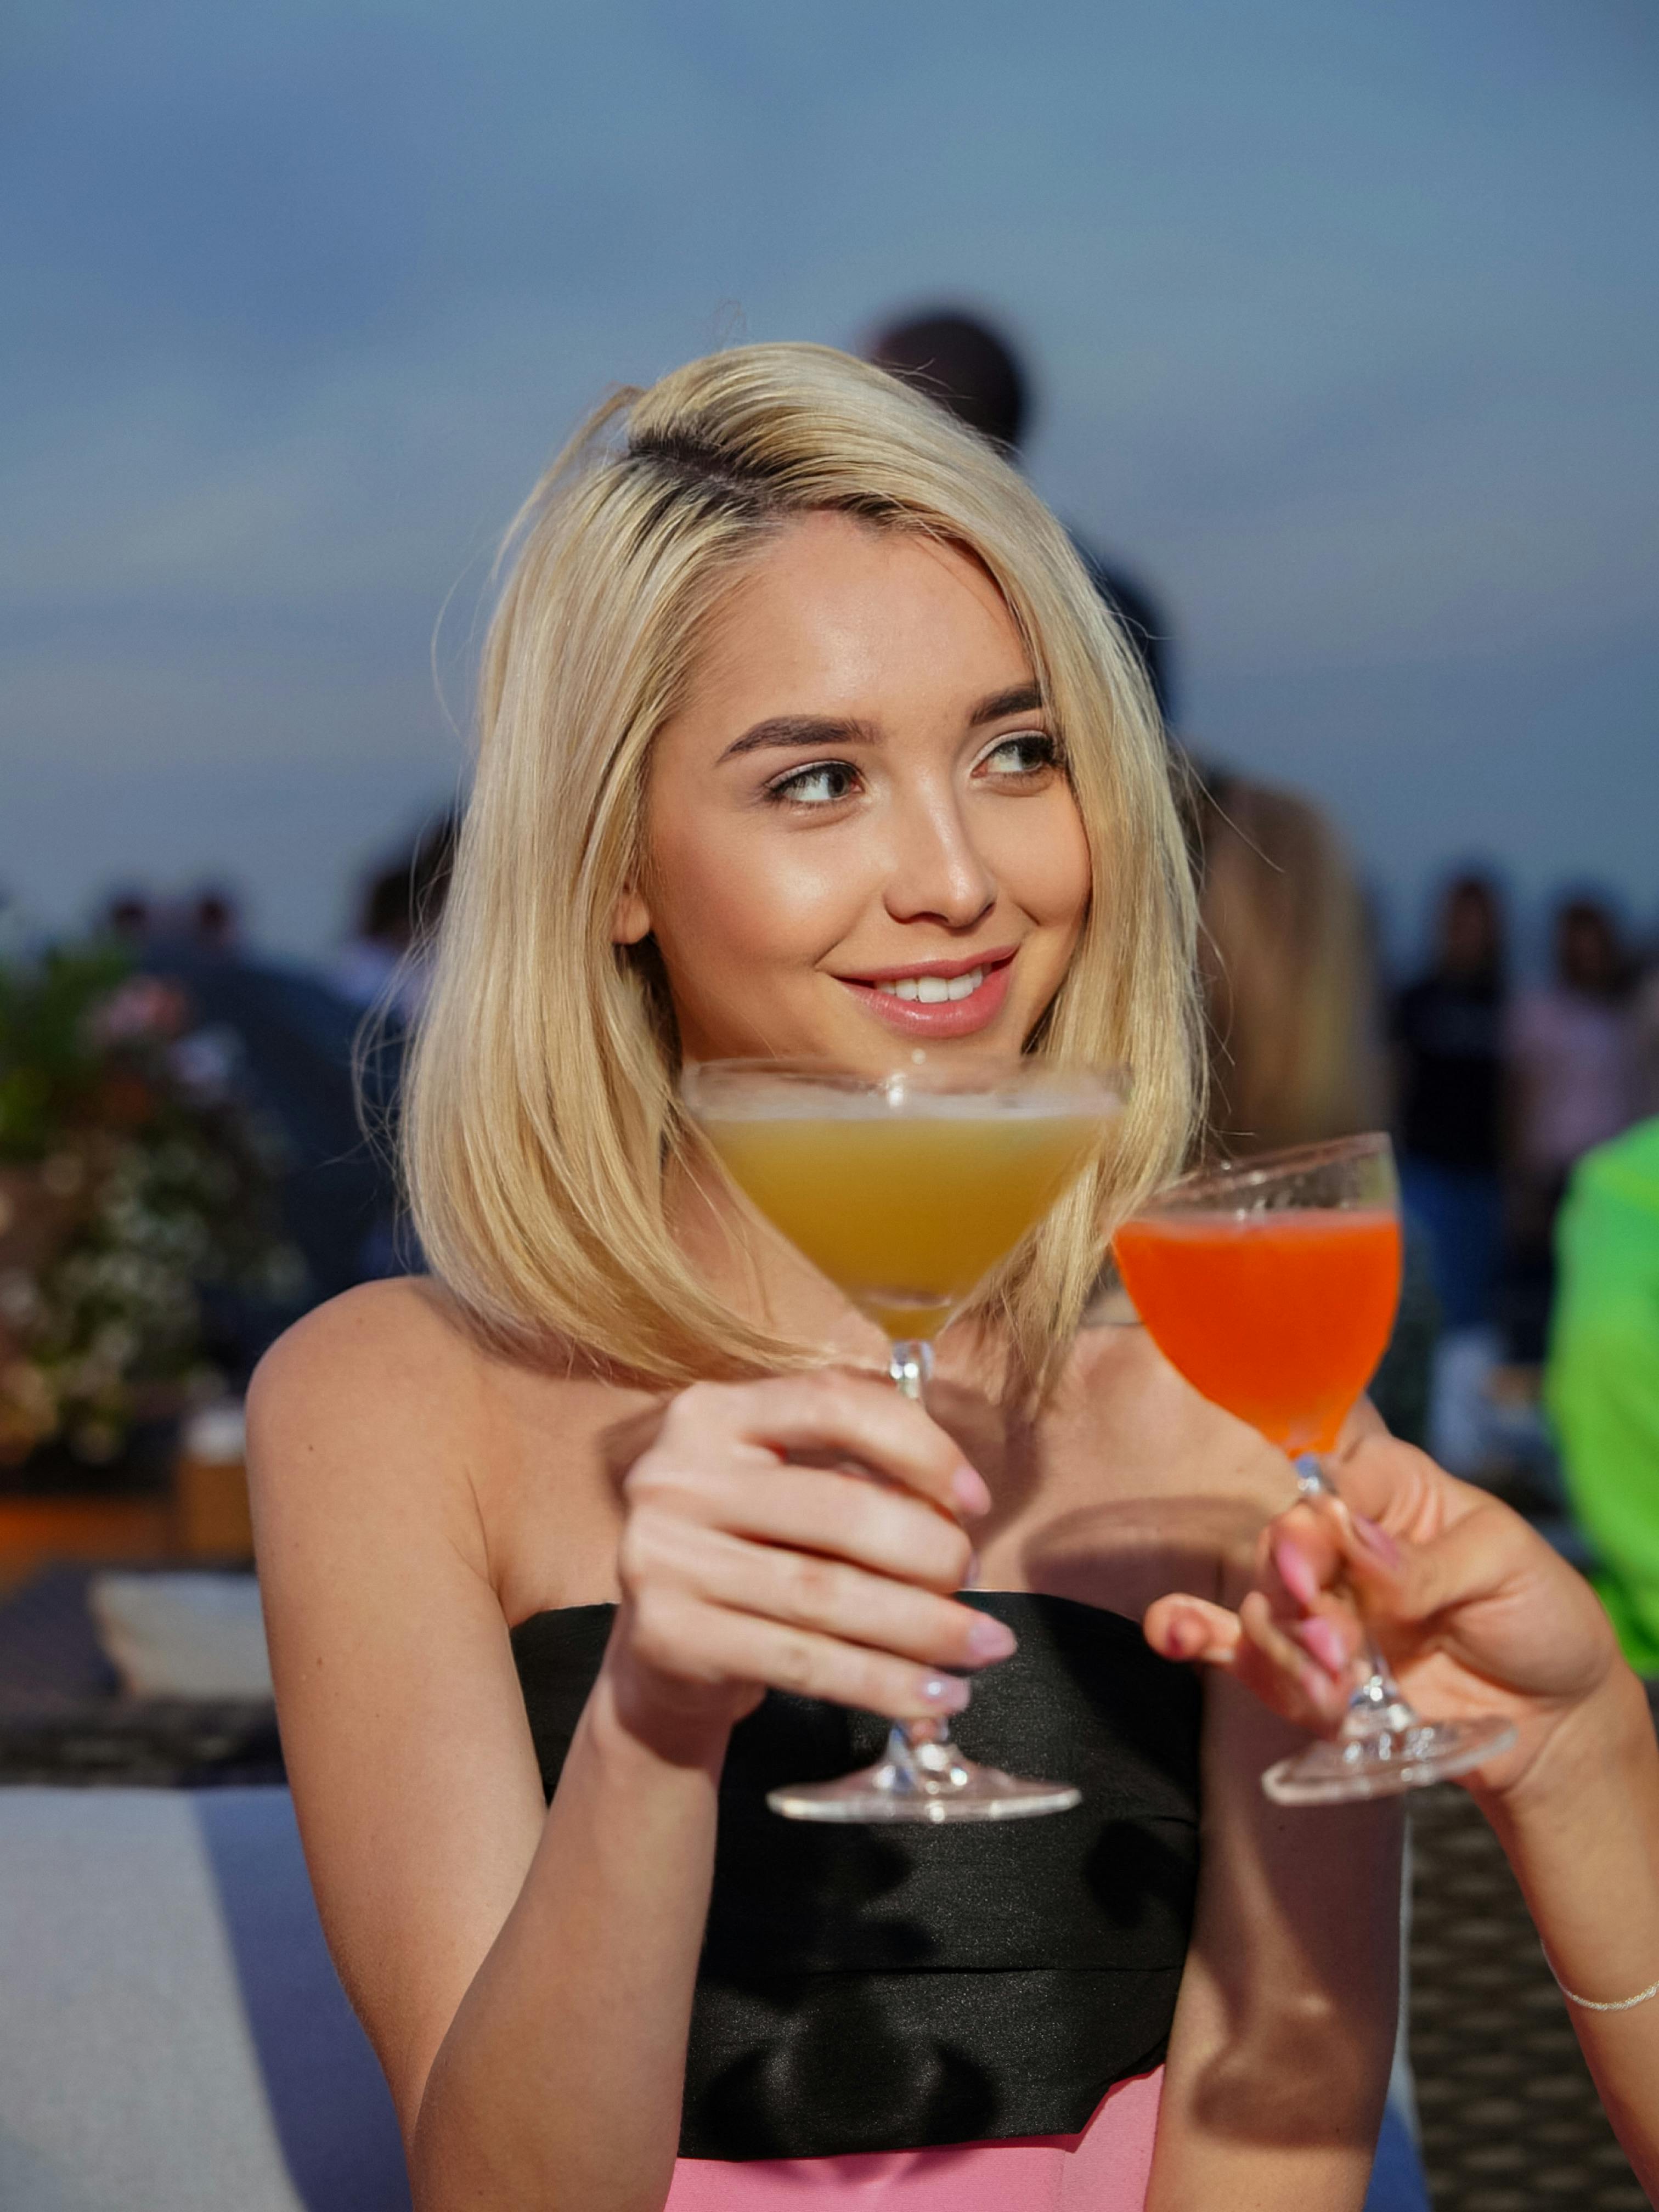 Blonde with a cocktail during a toast | Source: Pexels